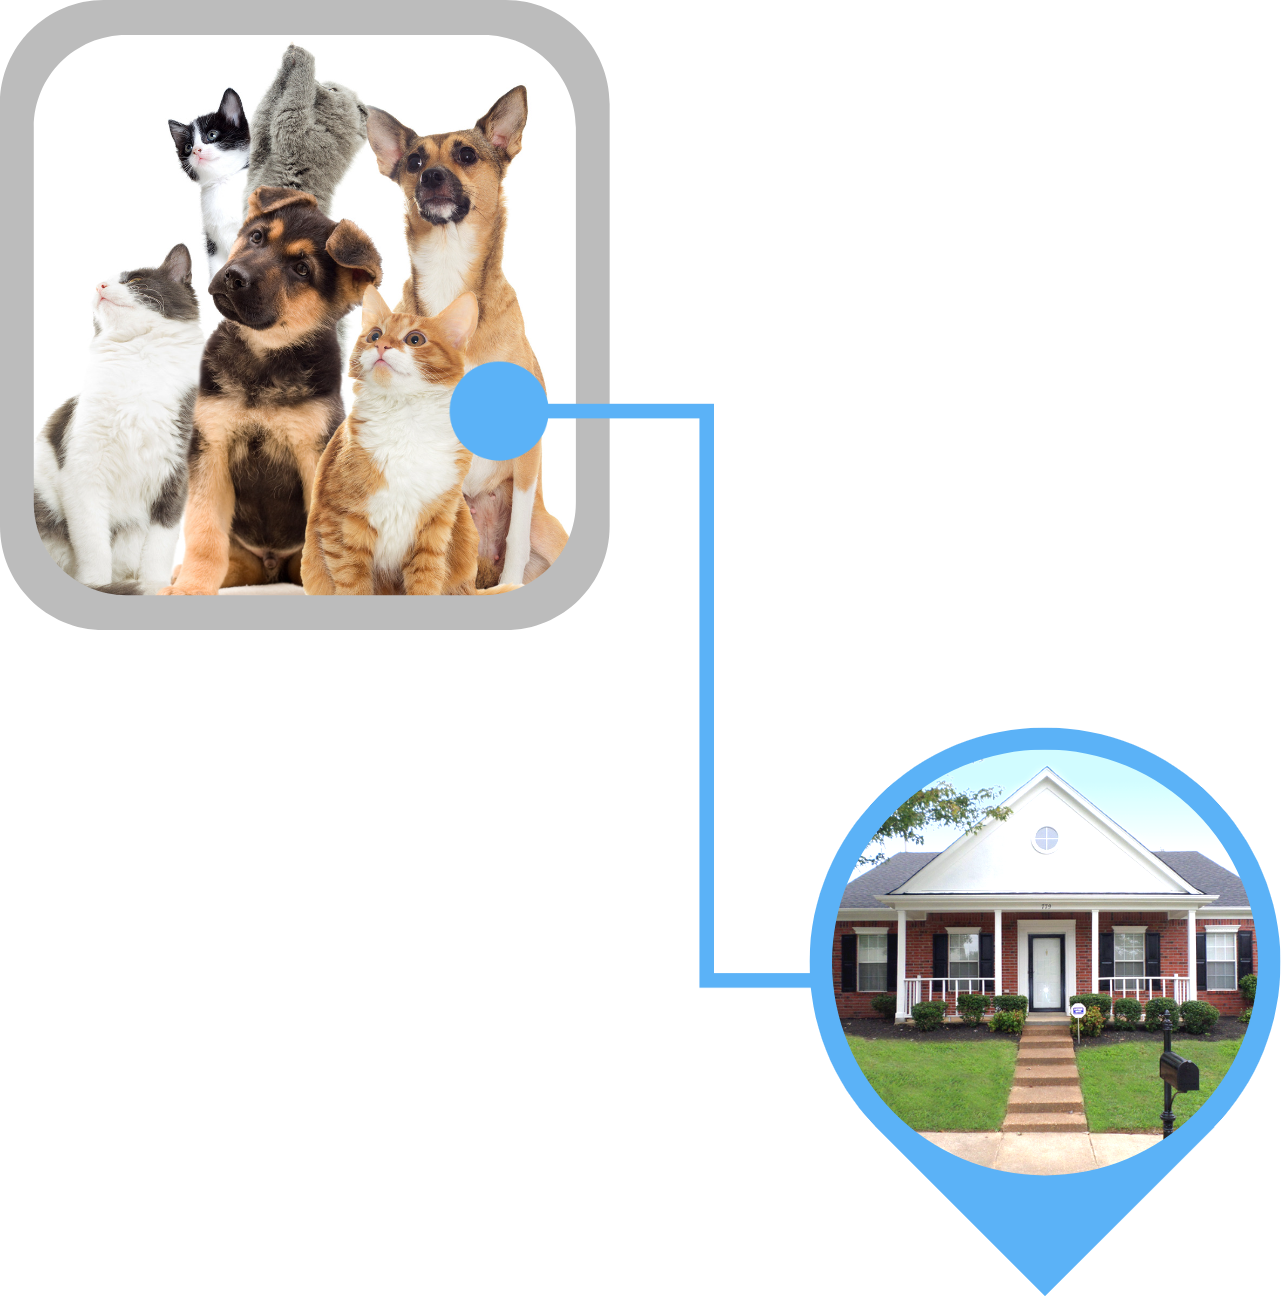 an image of a house connected to an image of a group of cats and dogs